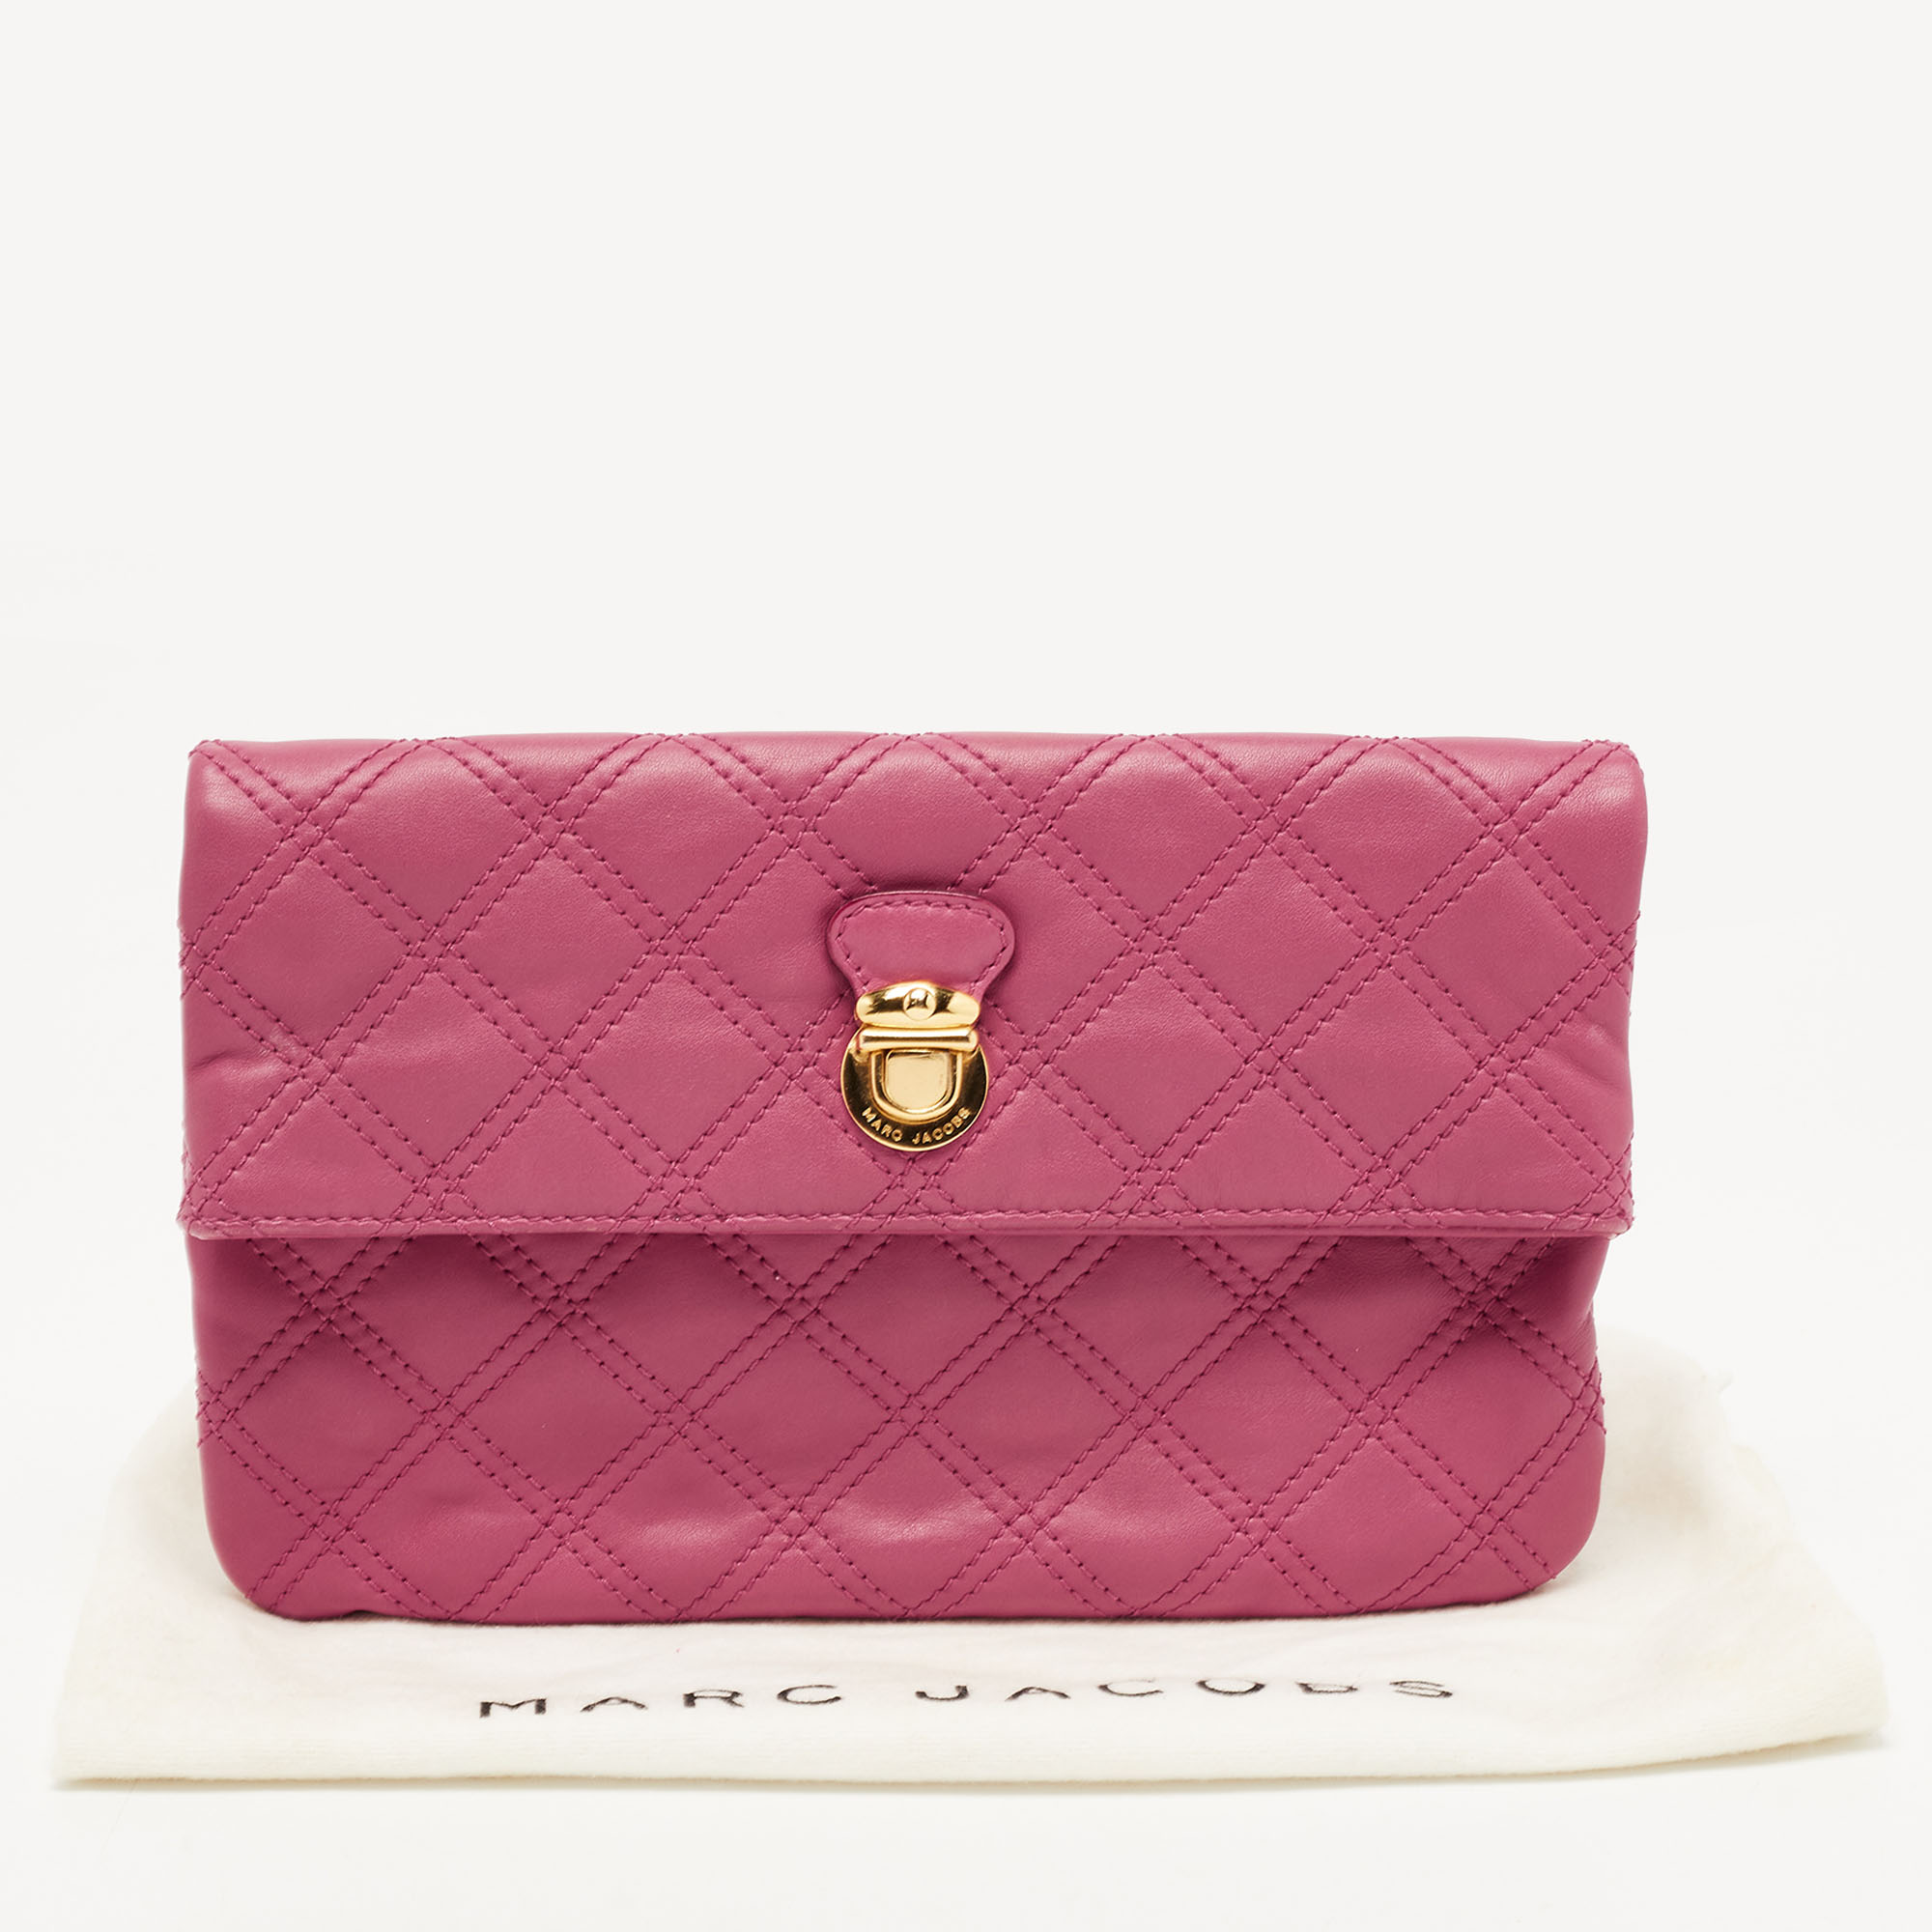 Marc Jacobs Dark Pink Quilted Leather Eugenie Clutch